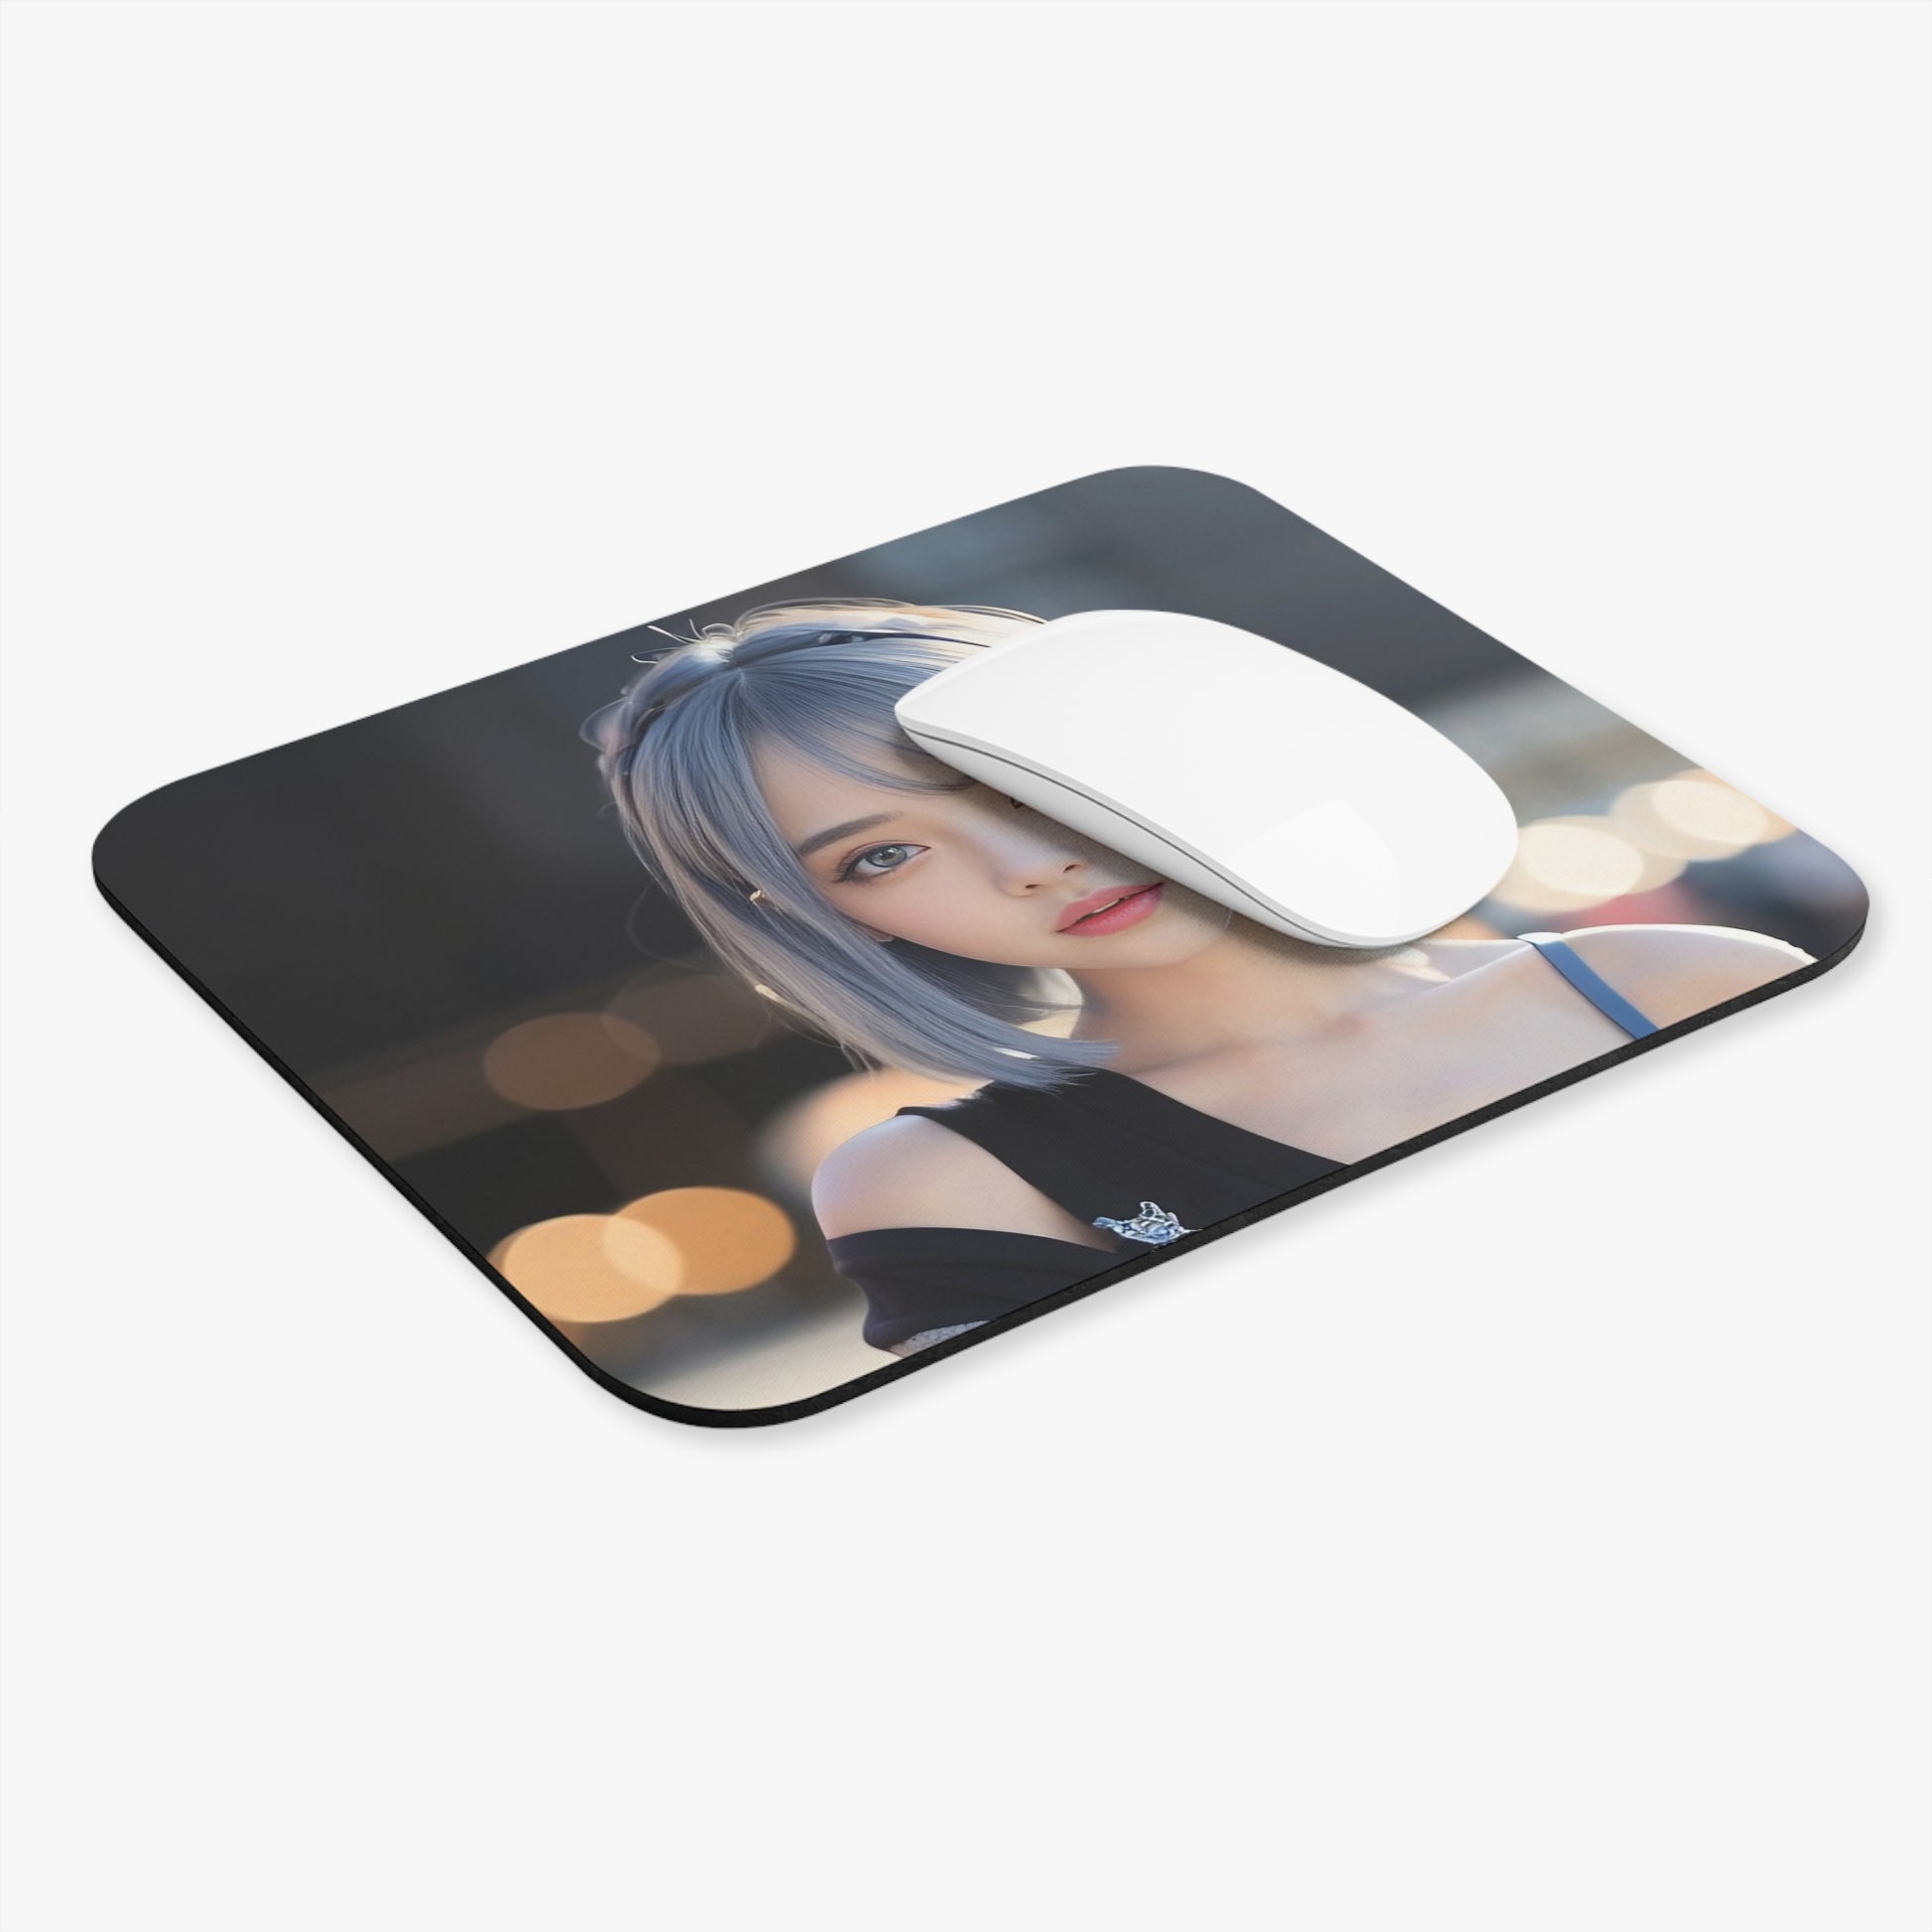 mouse pad delivers smooth mouse sliding action